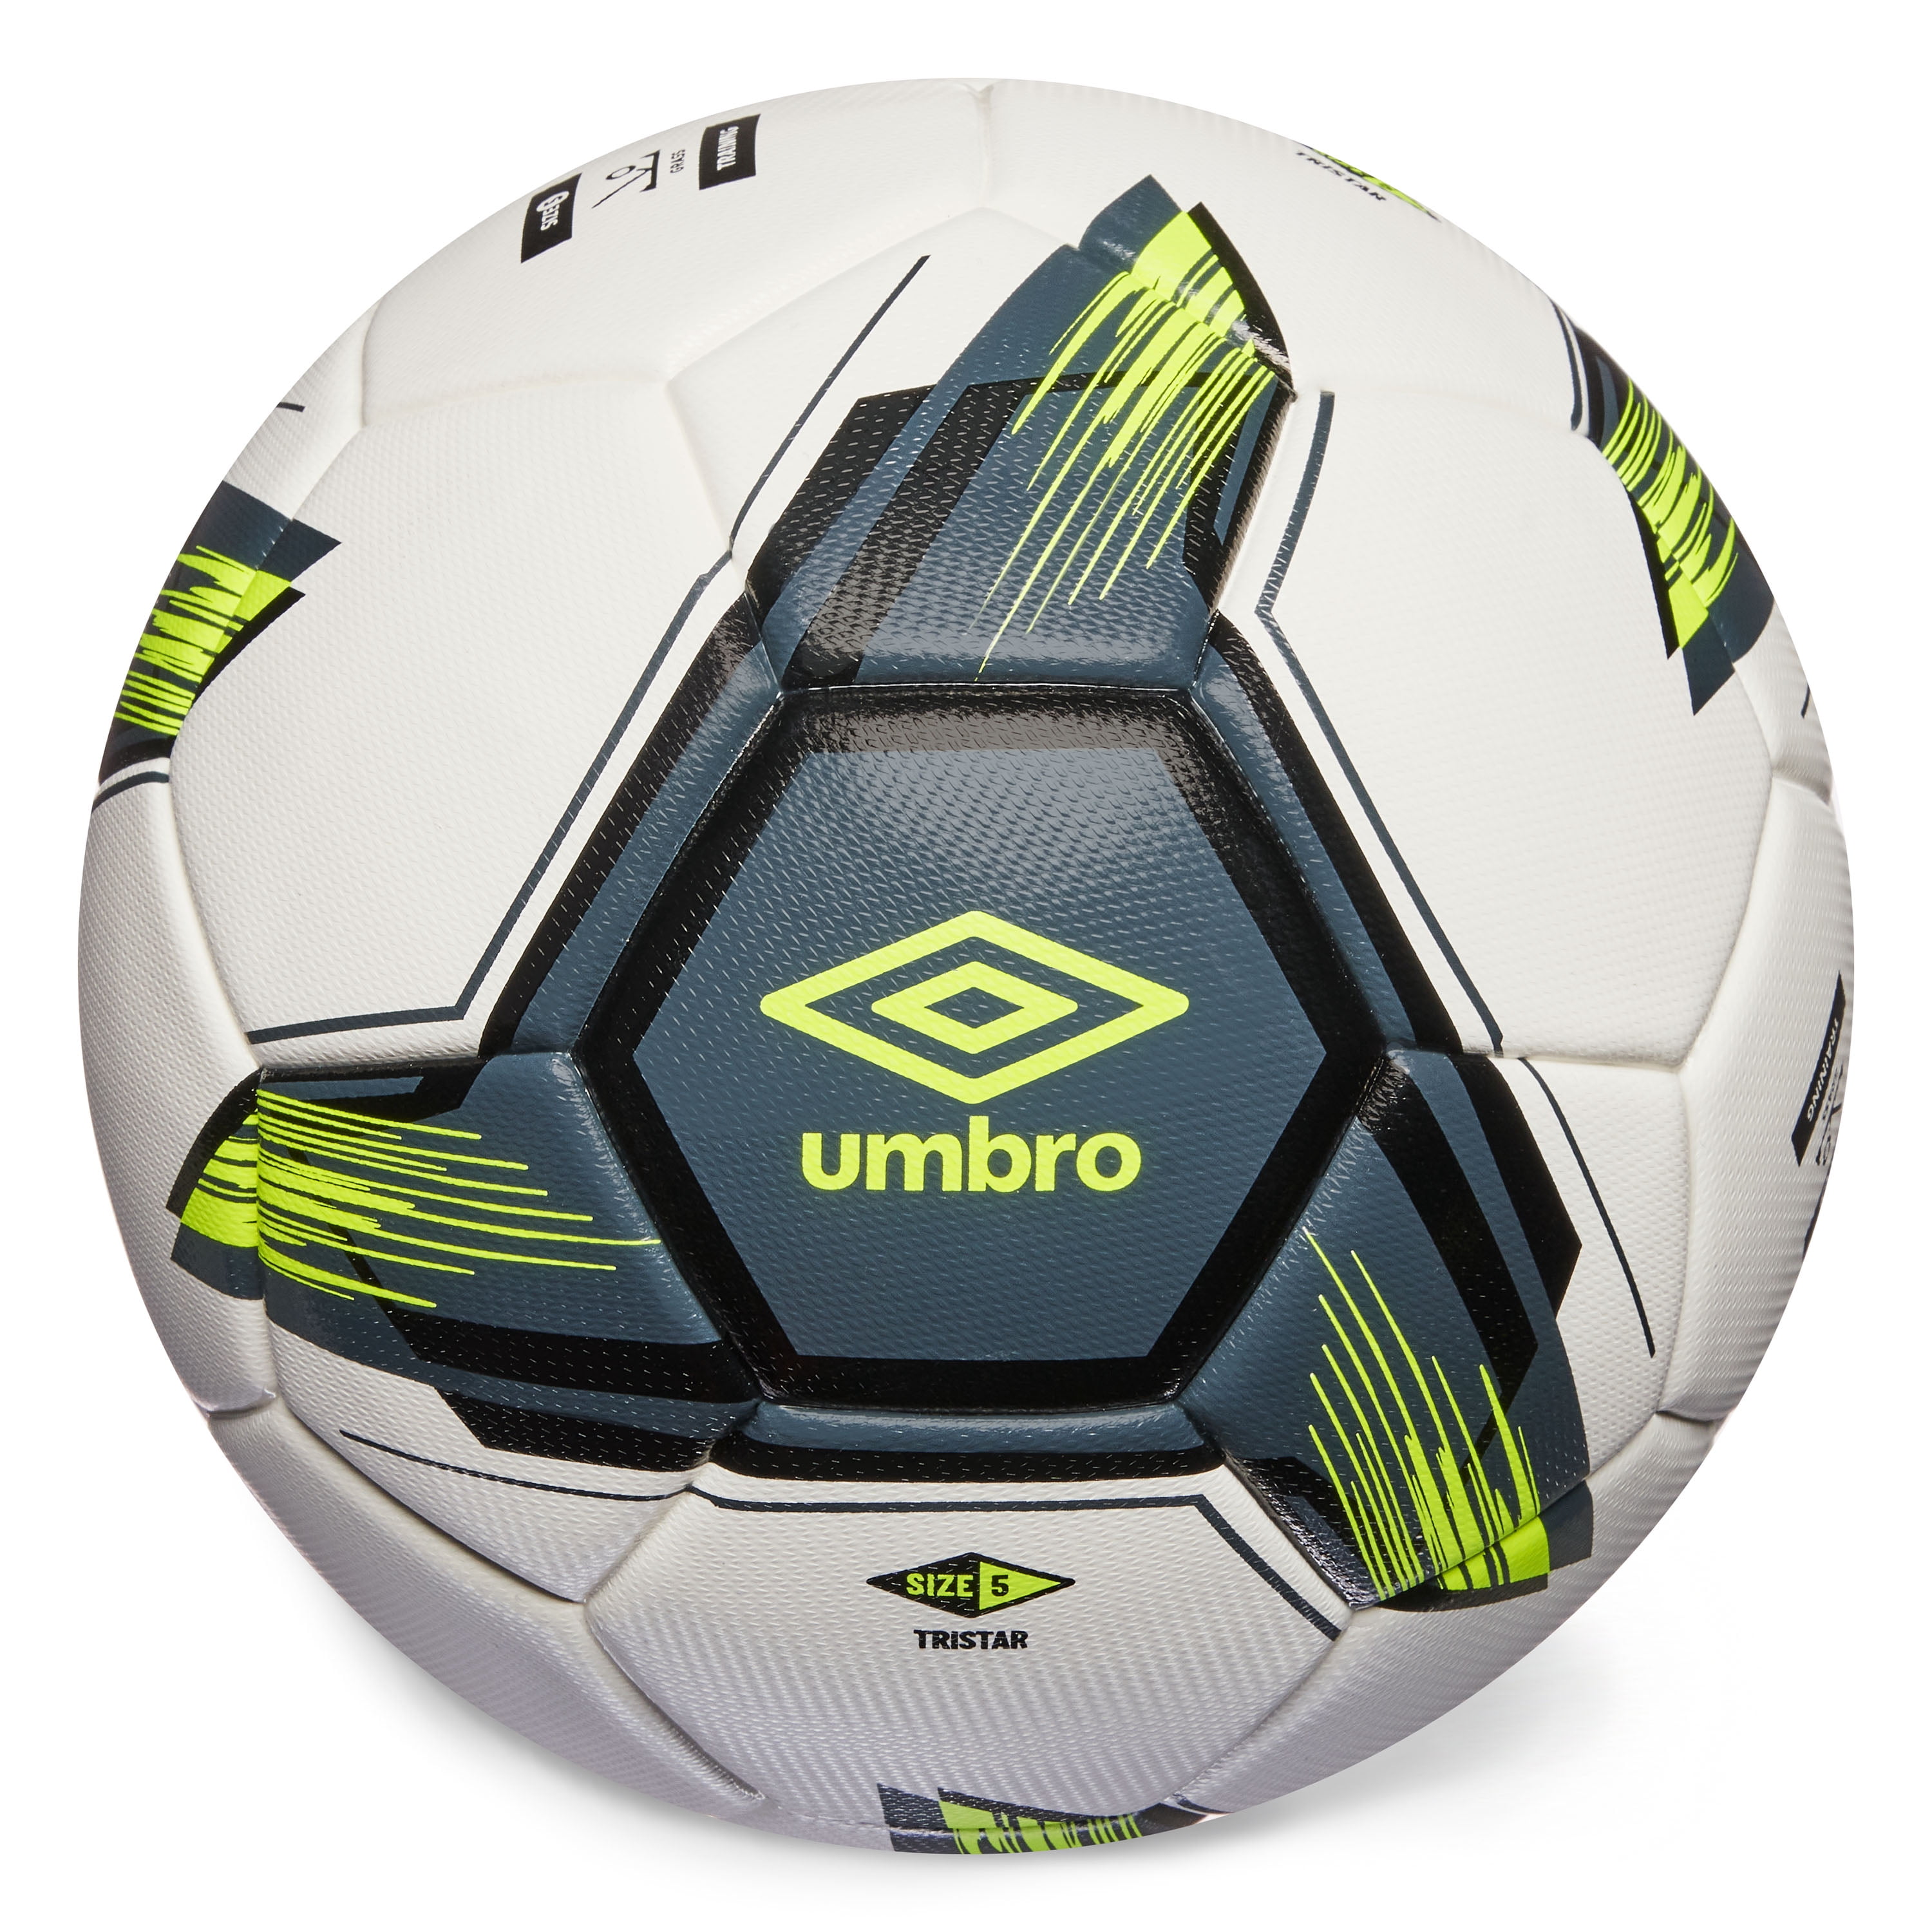 Umbro New York Cosmos Blade Trainer Soccer Ball Yellow/Blue/Grn Brand NEW Size 5 